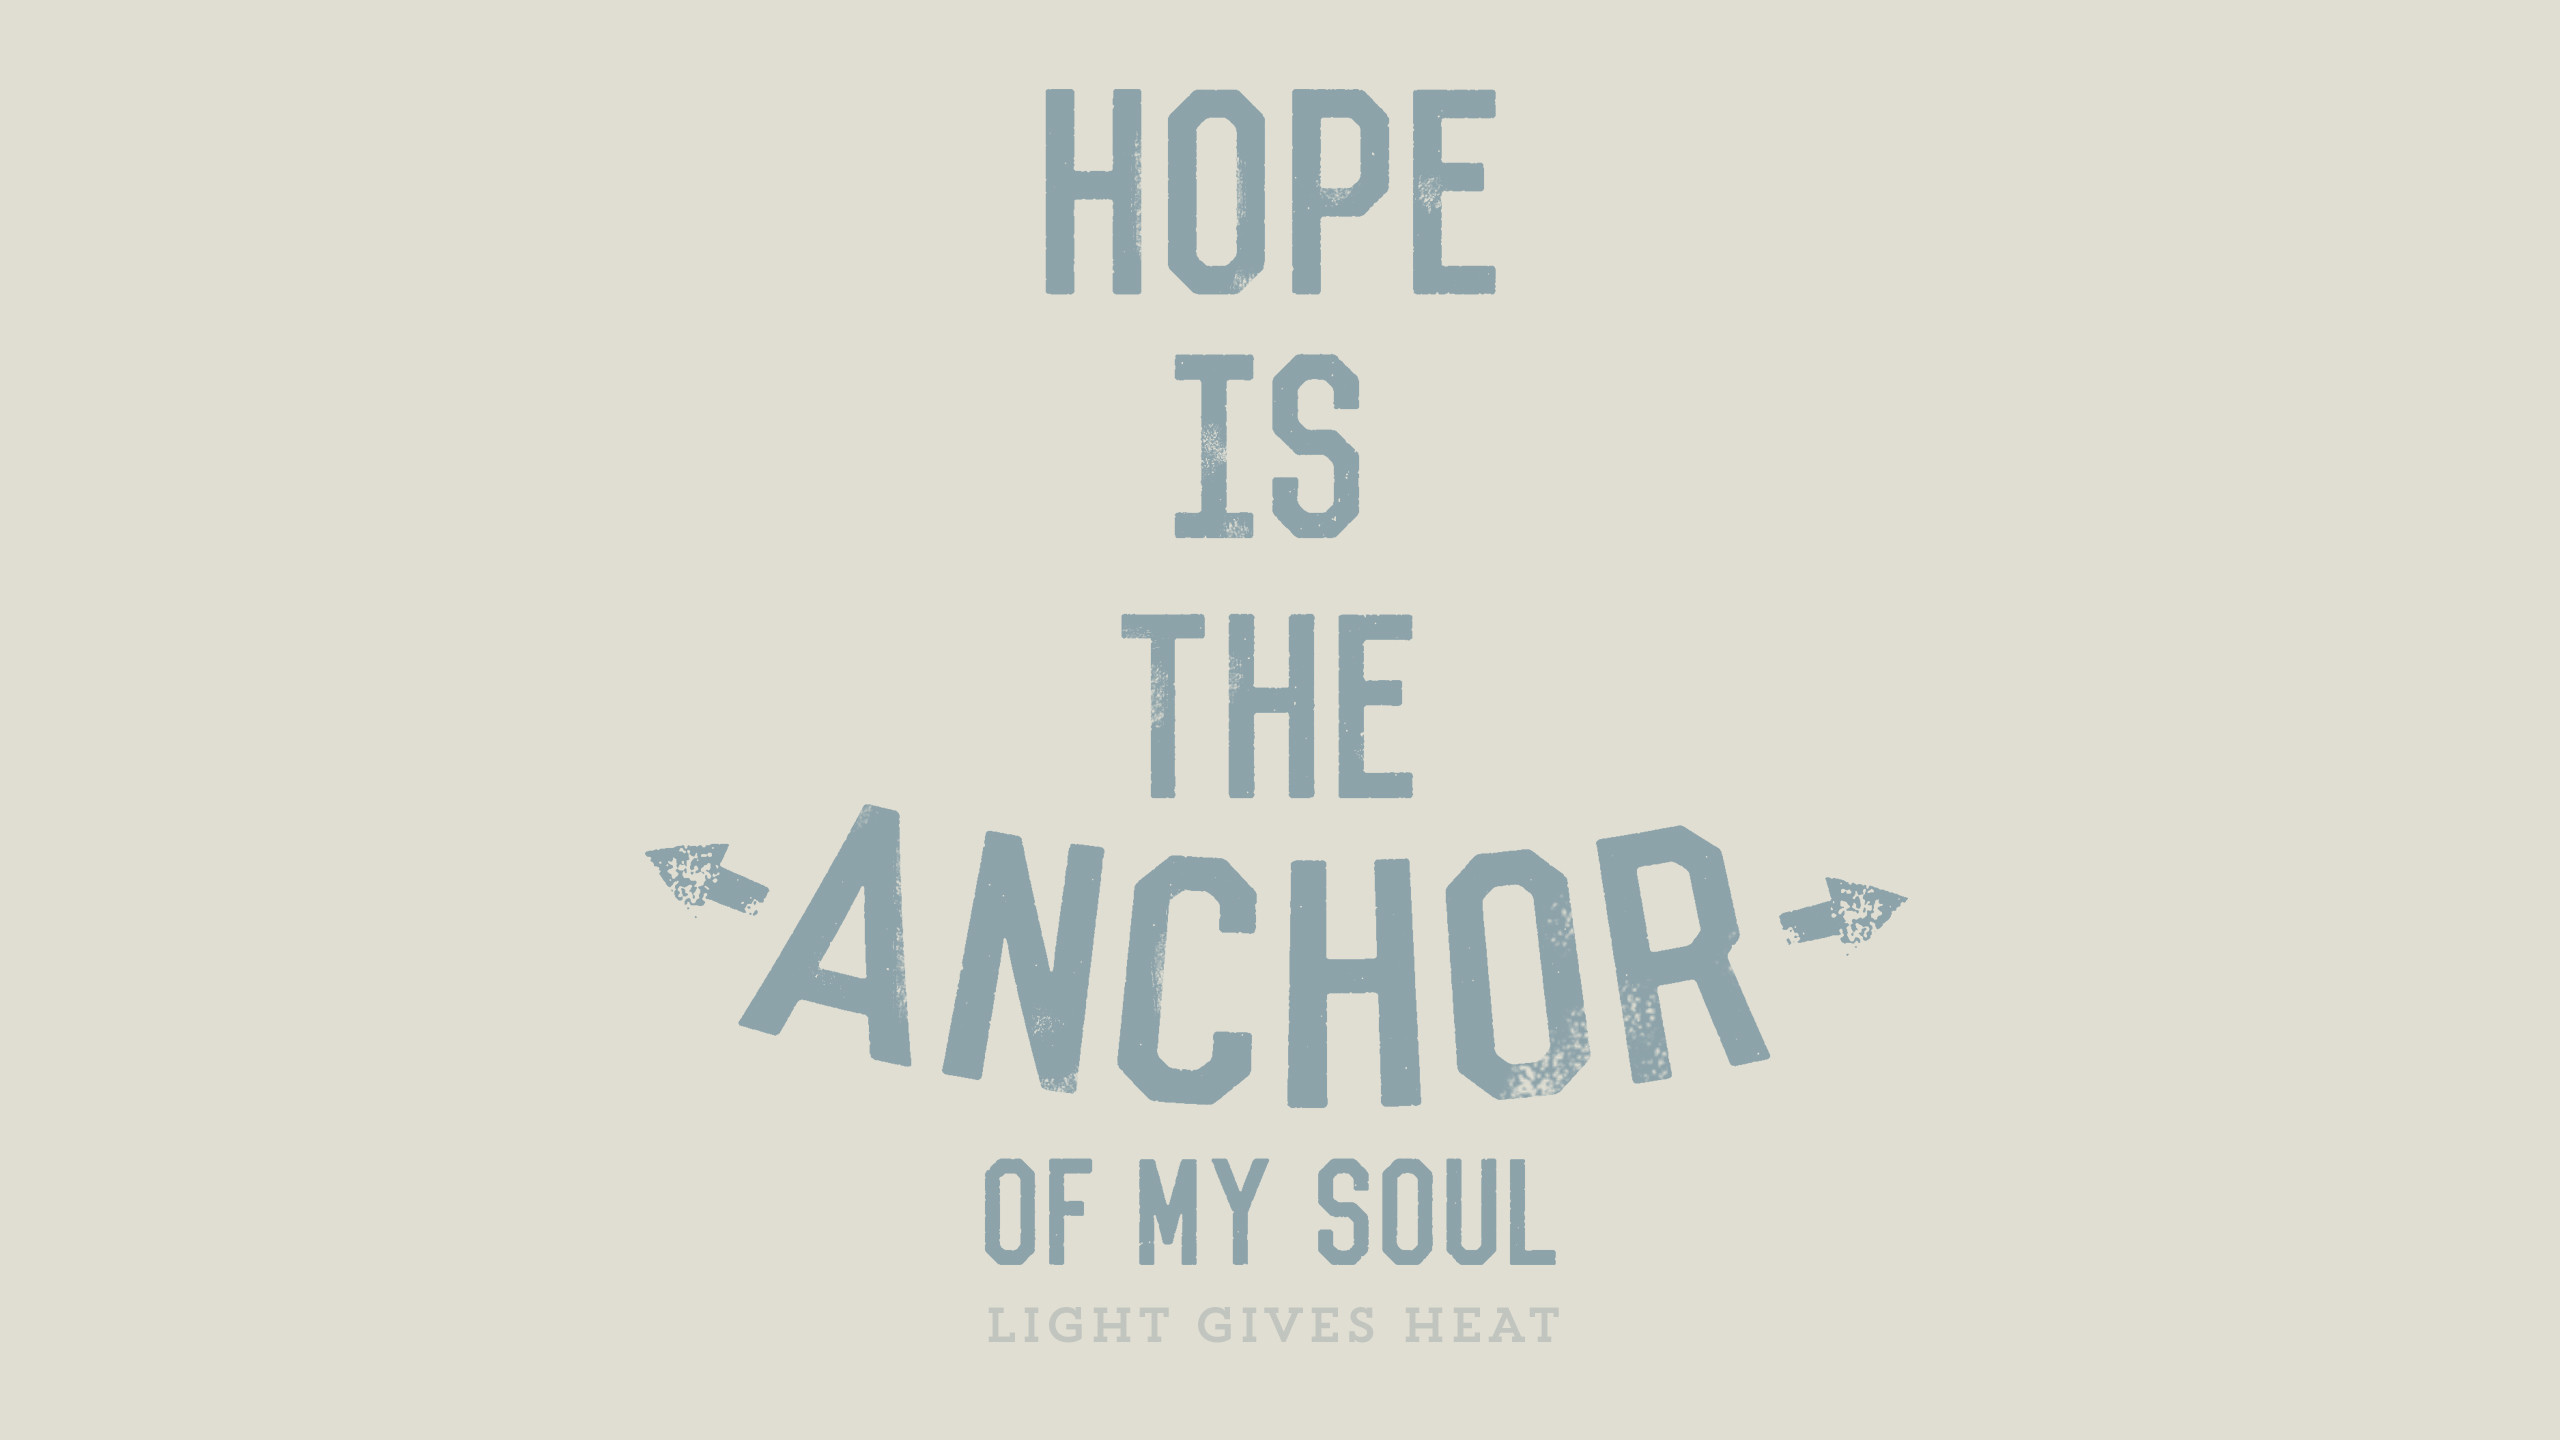 2560x1440 Anchor Wallpaper For Iphone Hope is the anchor (mobile